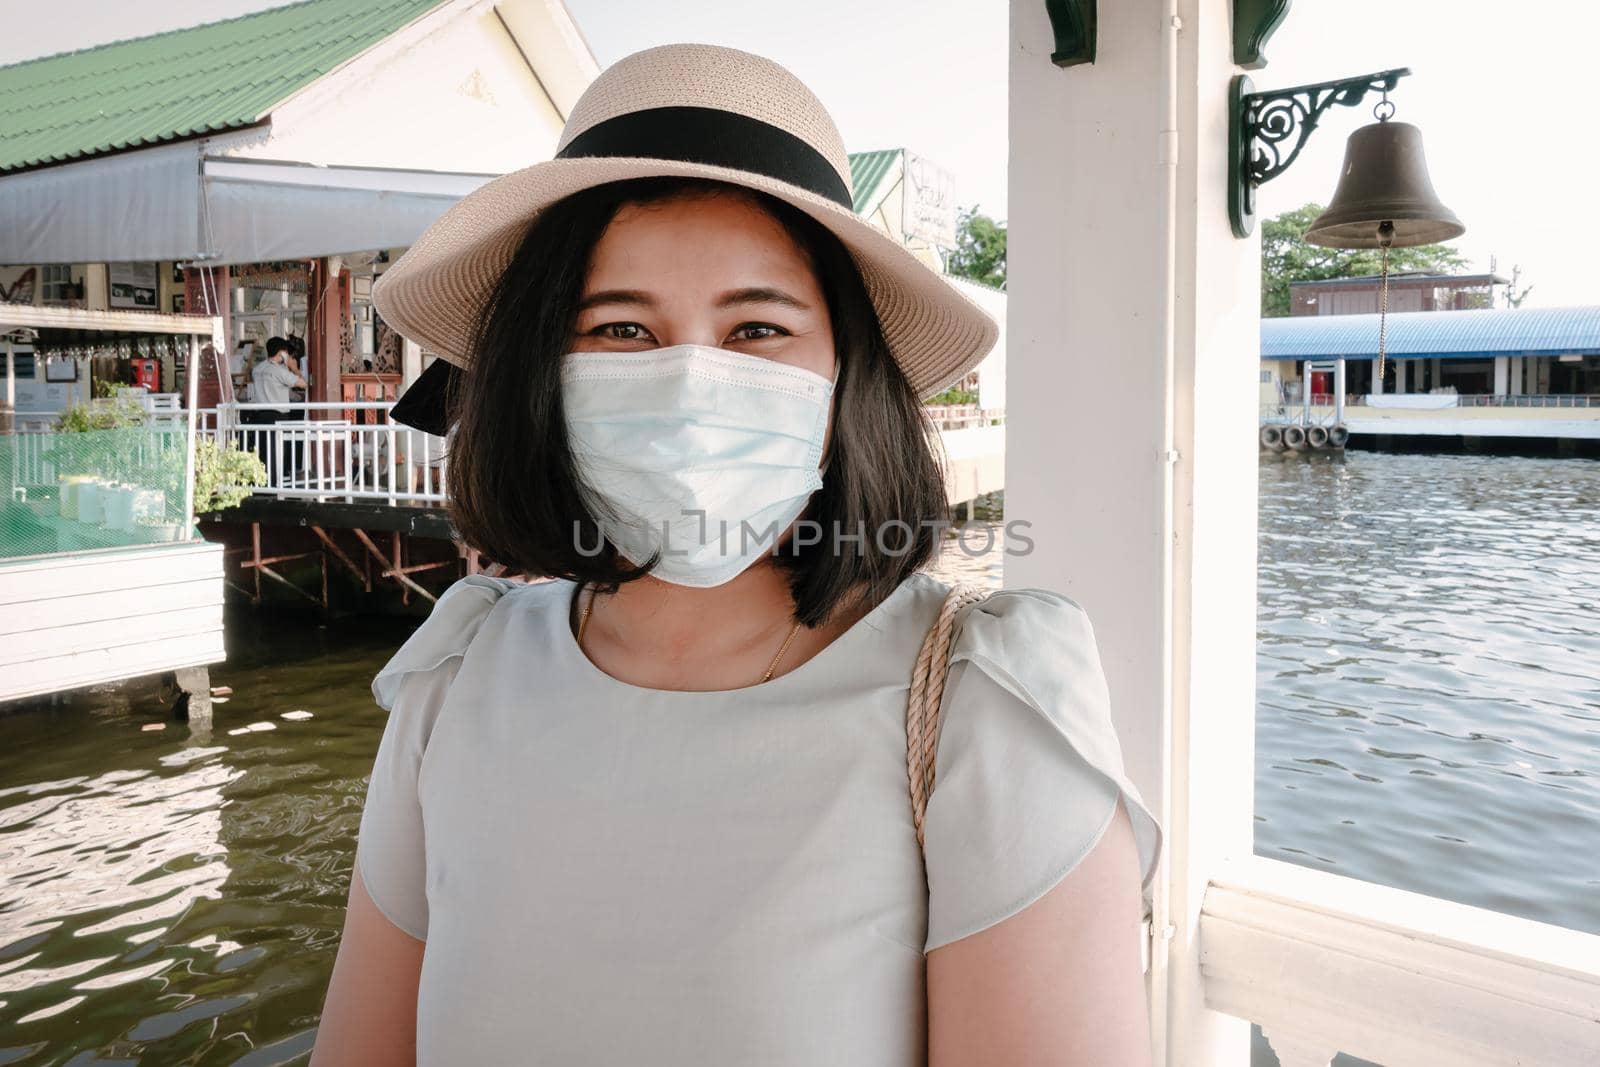 Smile Tourist Woman Having Fun While Sightseeing Bangkok Cityscape beside The River, Portrait of Happy Smiling Tourist Woman in Wearing Face Mask During New Normal Covid-19 Situation. Travel Concept by MahaHeang245789